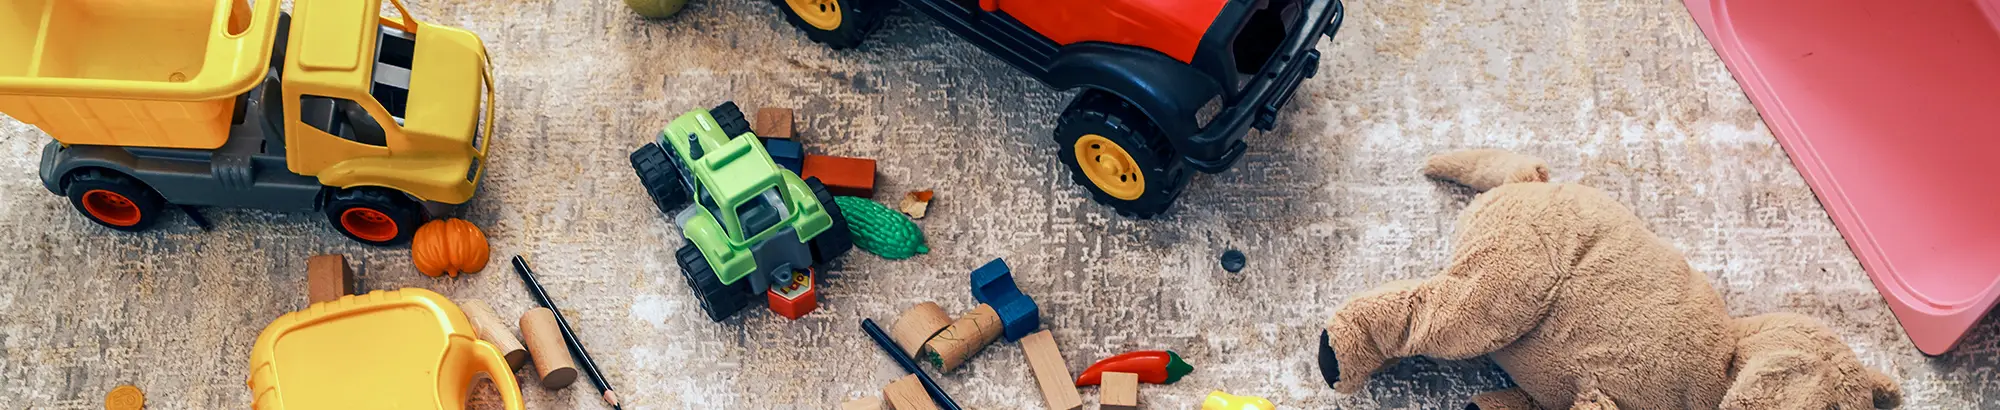 toy tractors, stuffed animals, and mini pumpkins laid out on the floor